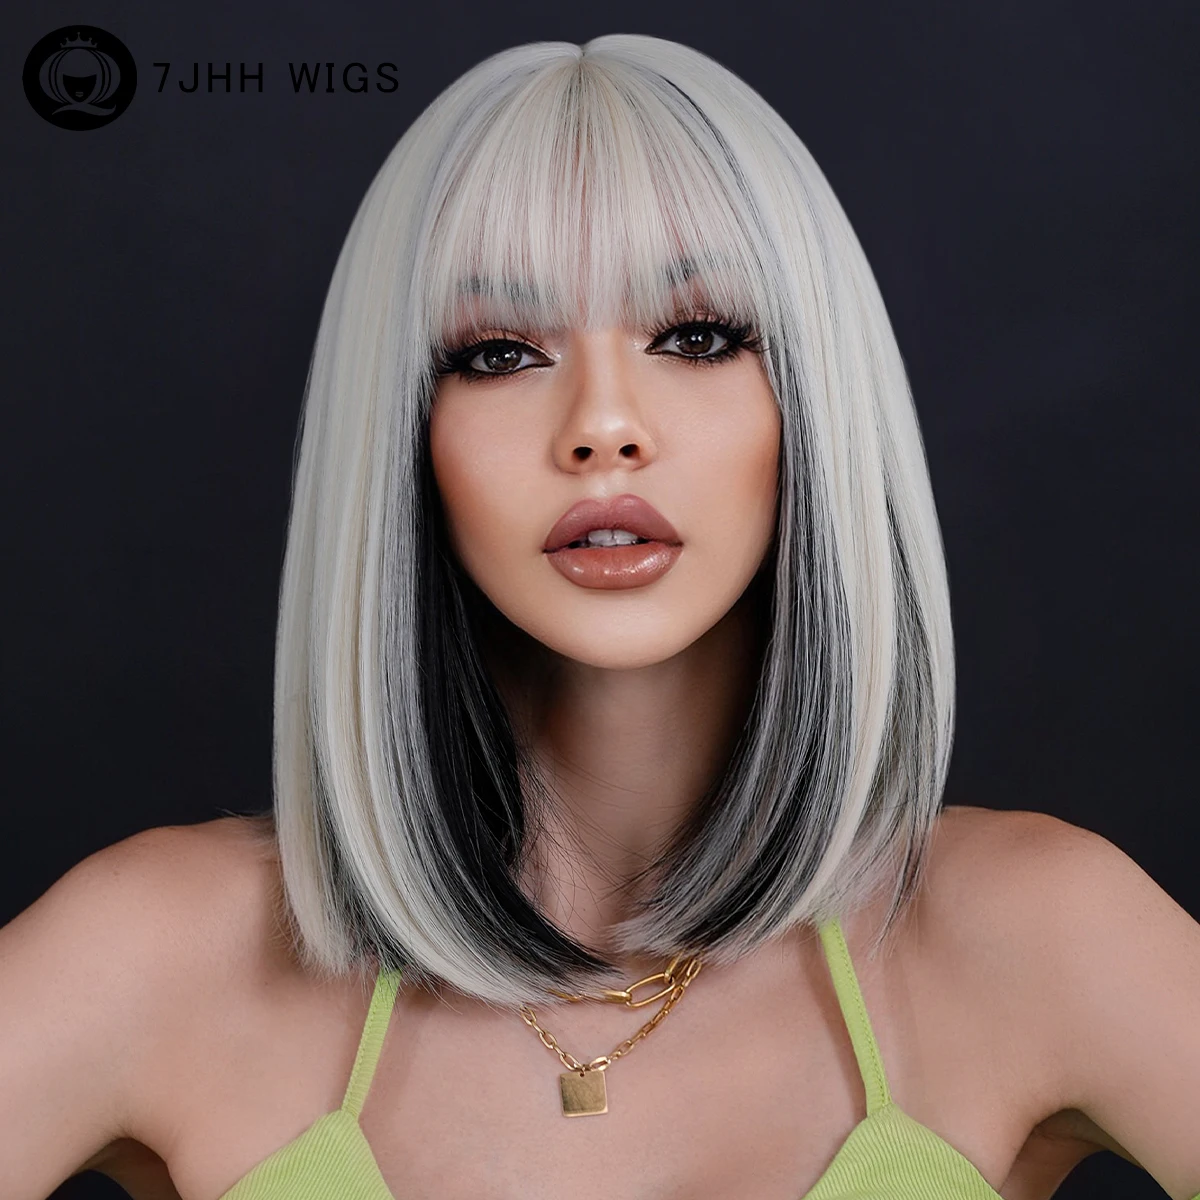 

7JHH WIGS Highlight Silvery Black Short Wig with Bangs for Woman Natural Synthetic Straight Hair Bob Wig Heat Resistant Fiber